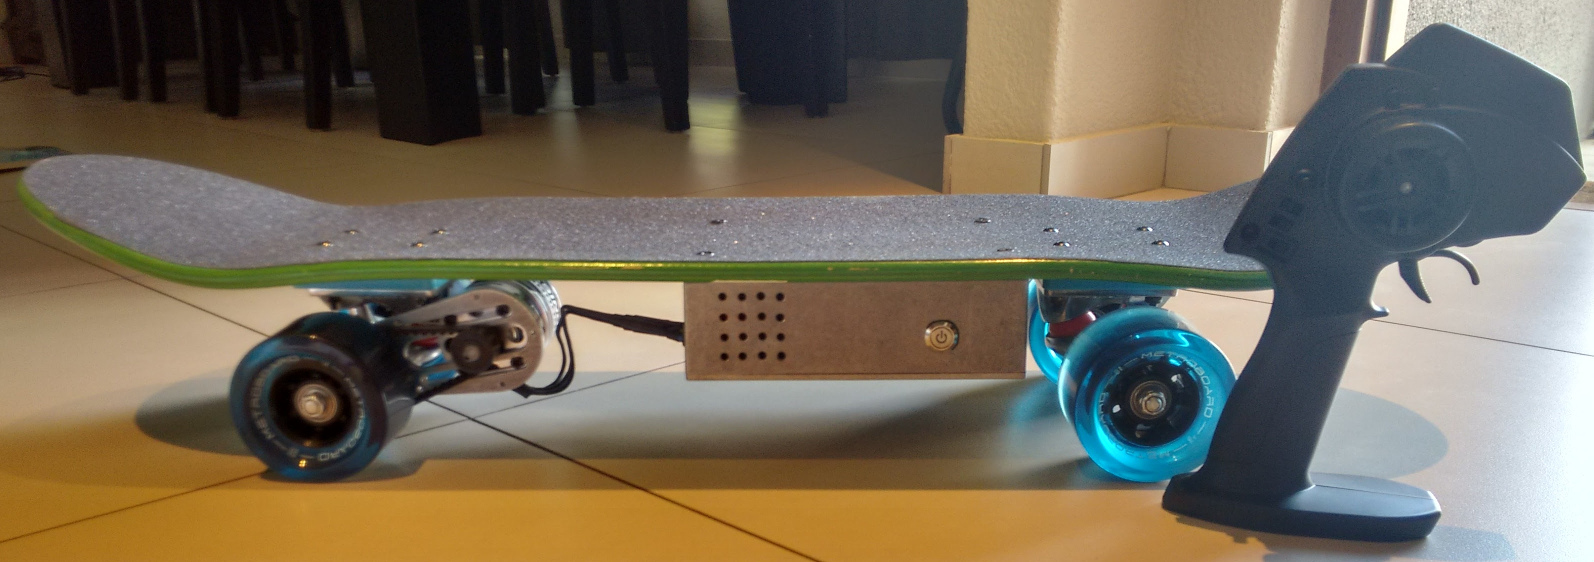 picture of eboard version 1: side